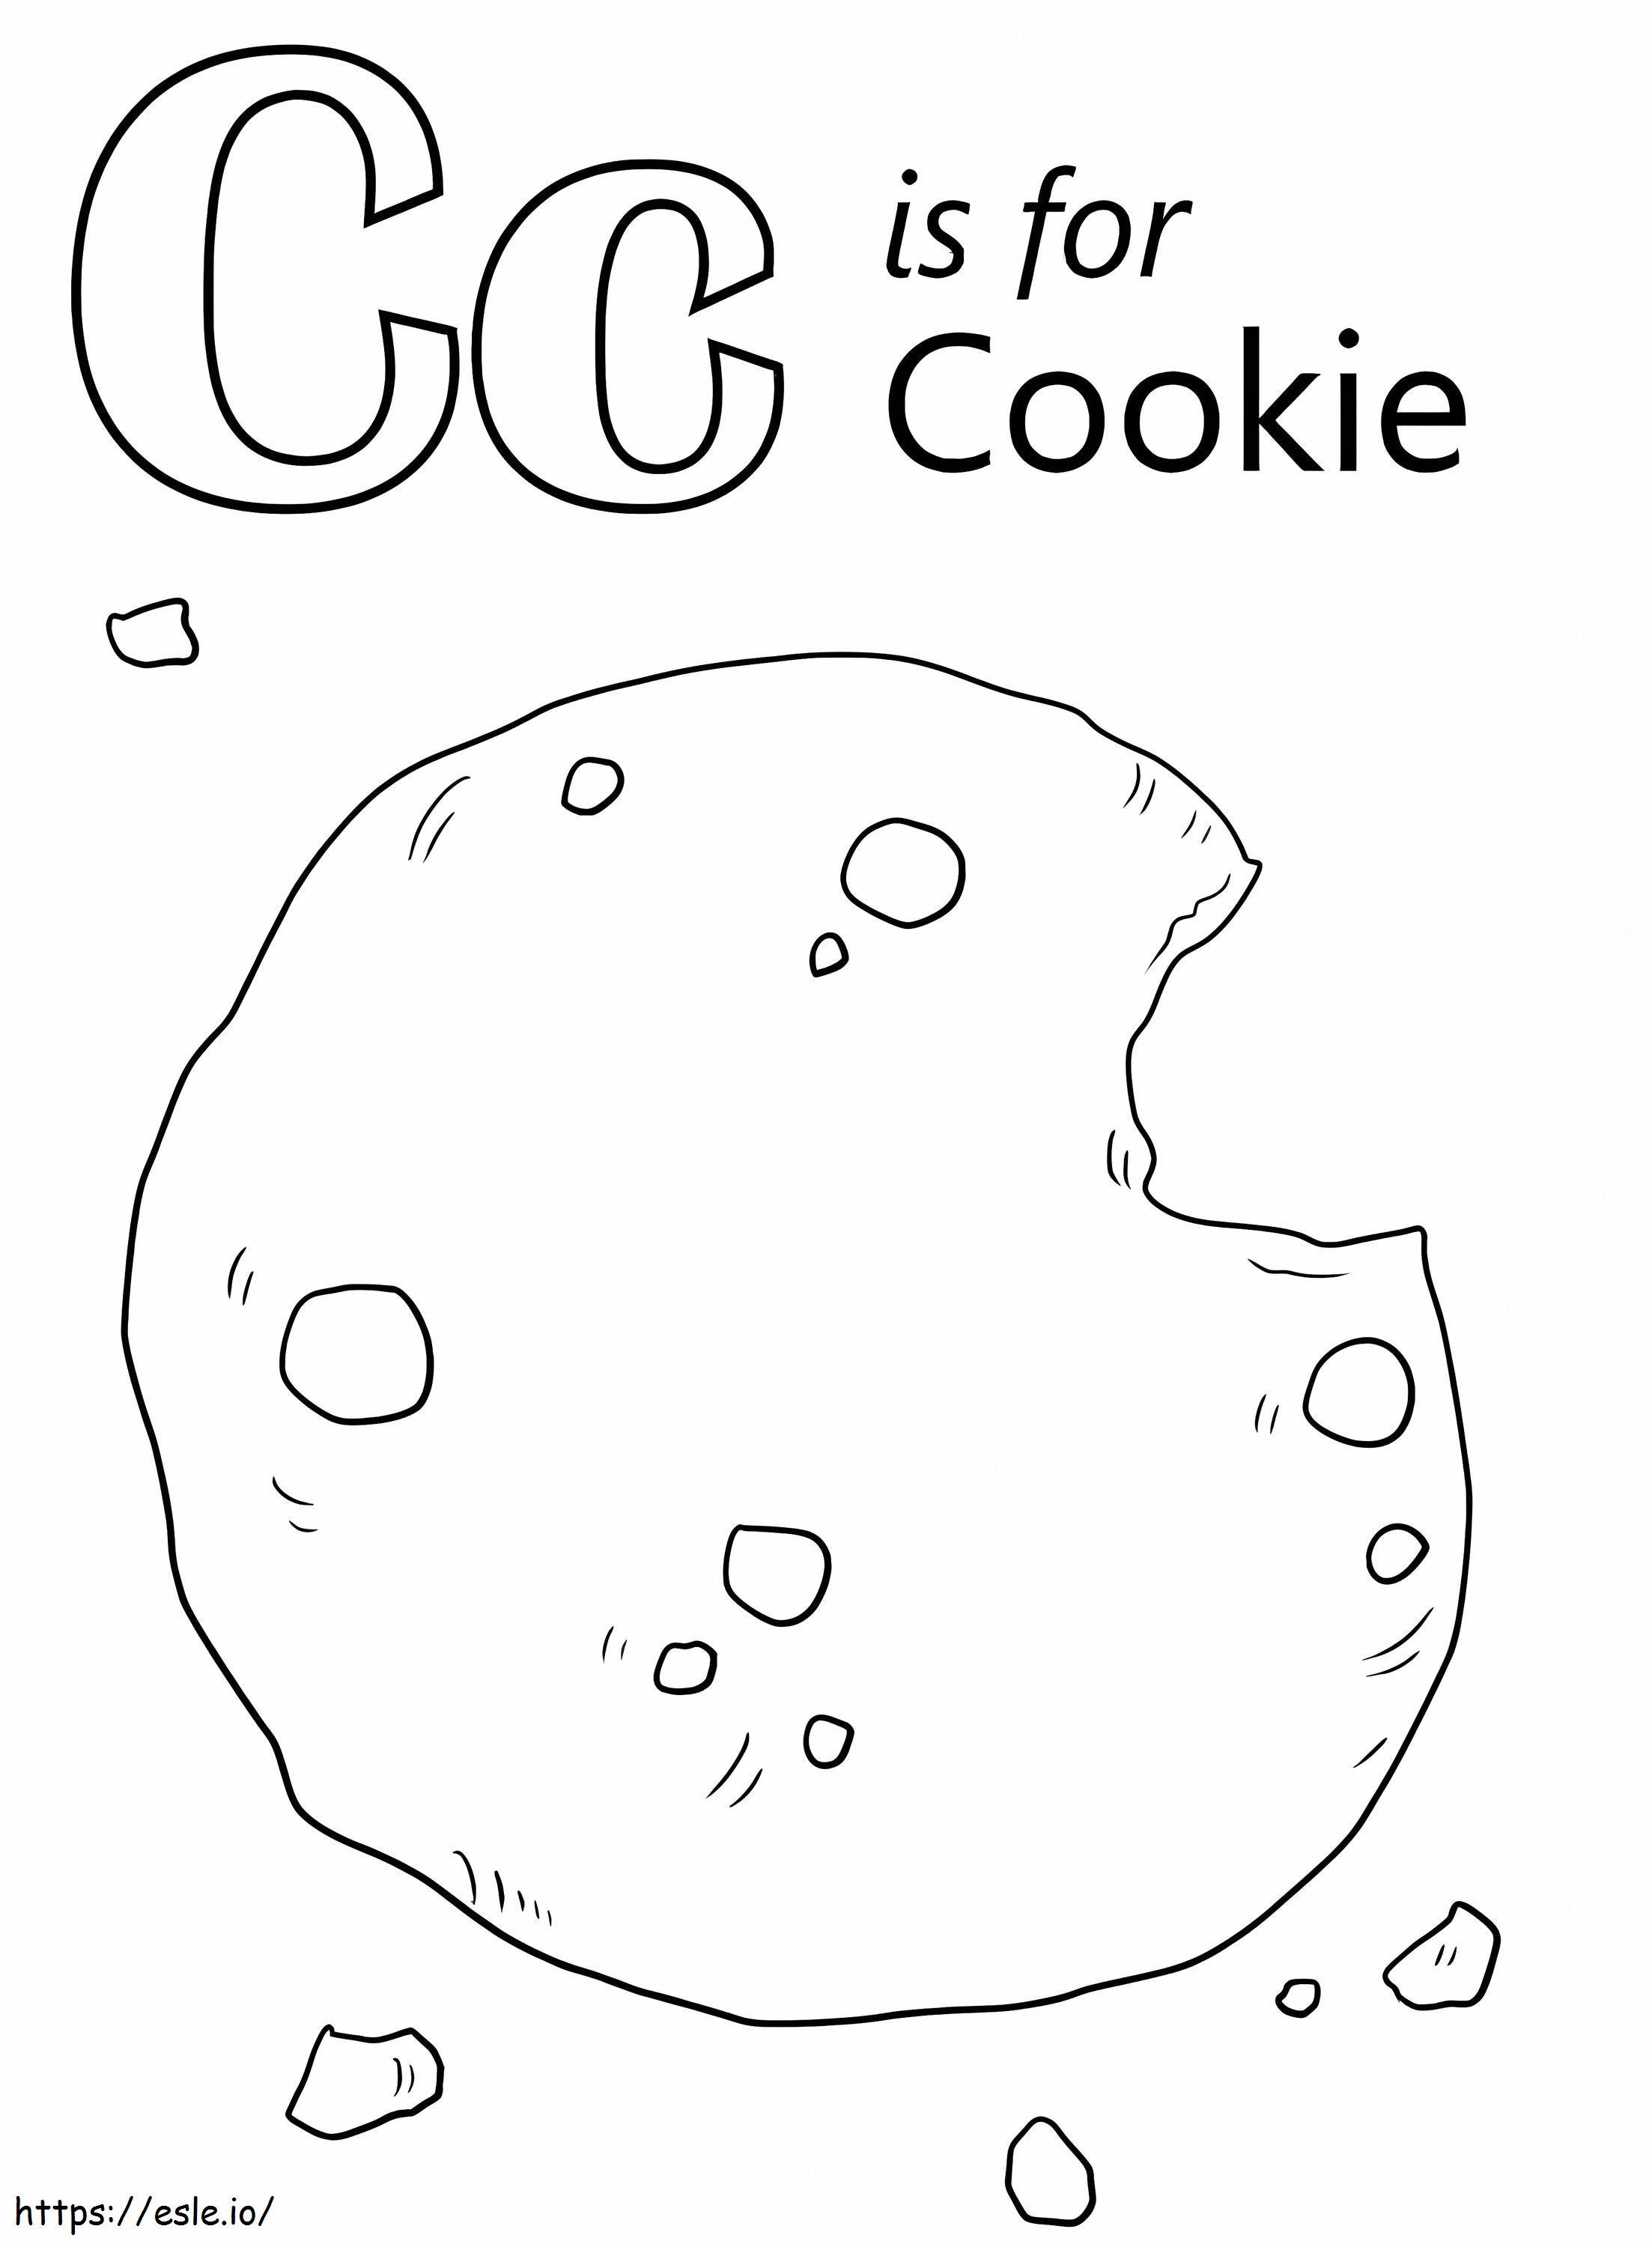 Cookie Letter C coloring page